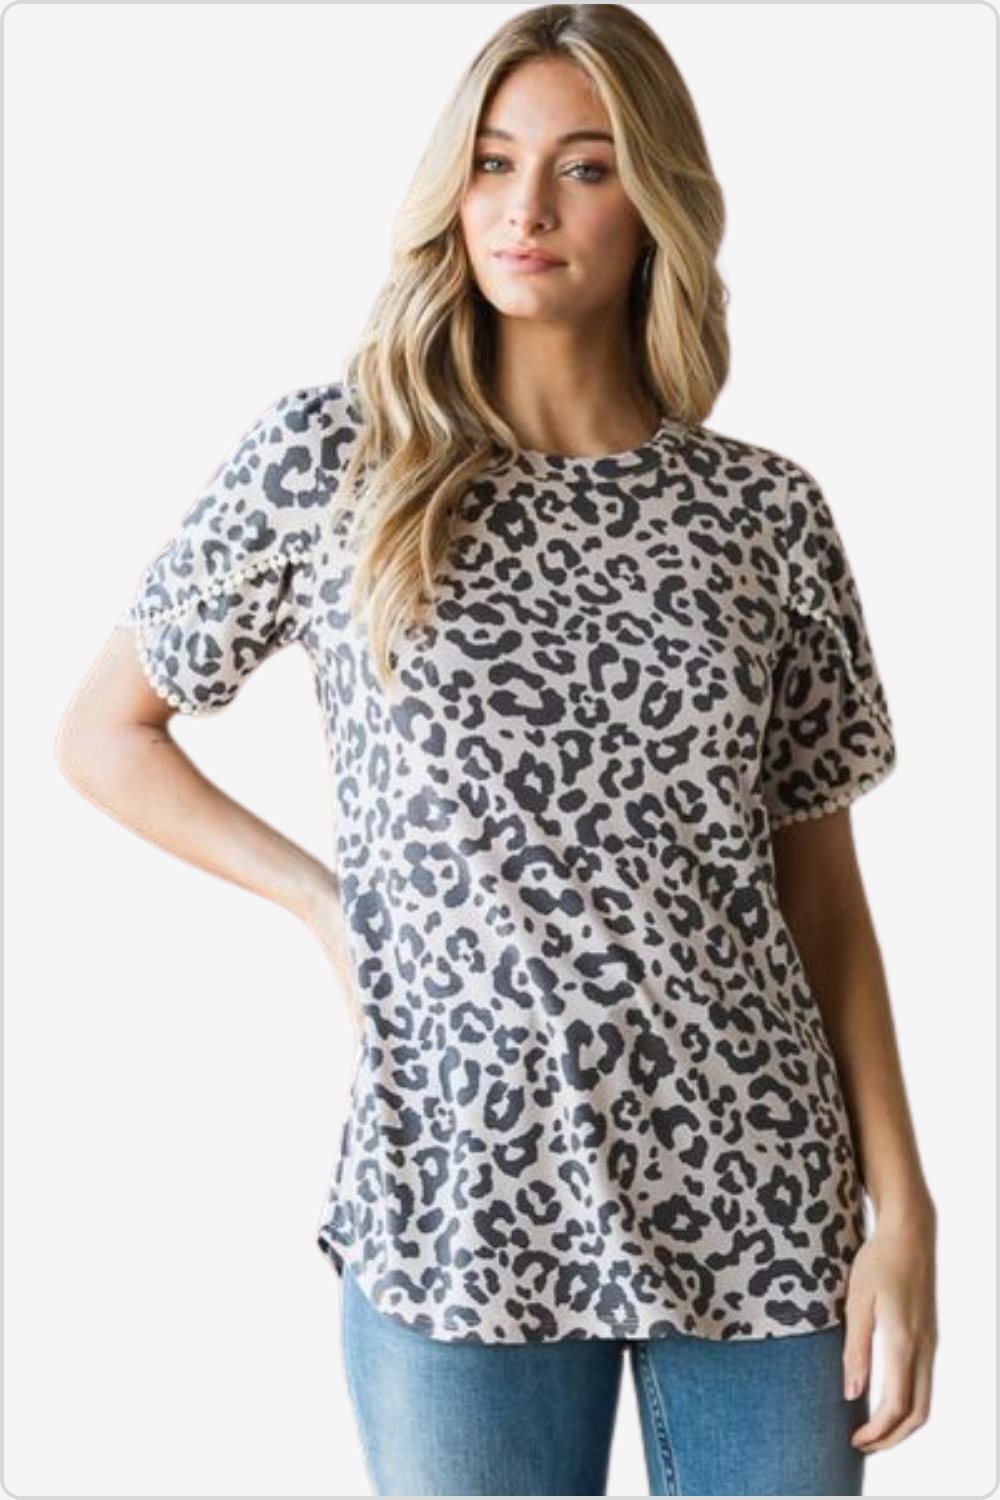 Full View of Leopard Round Neck T-Shirt on Model